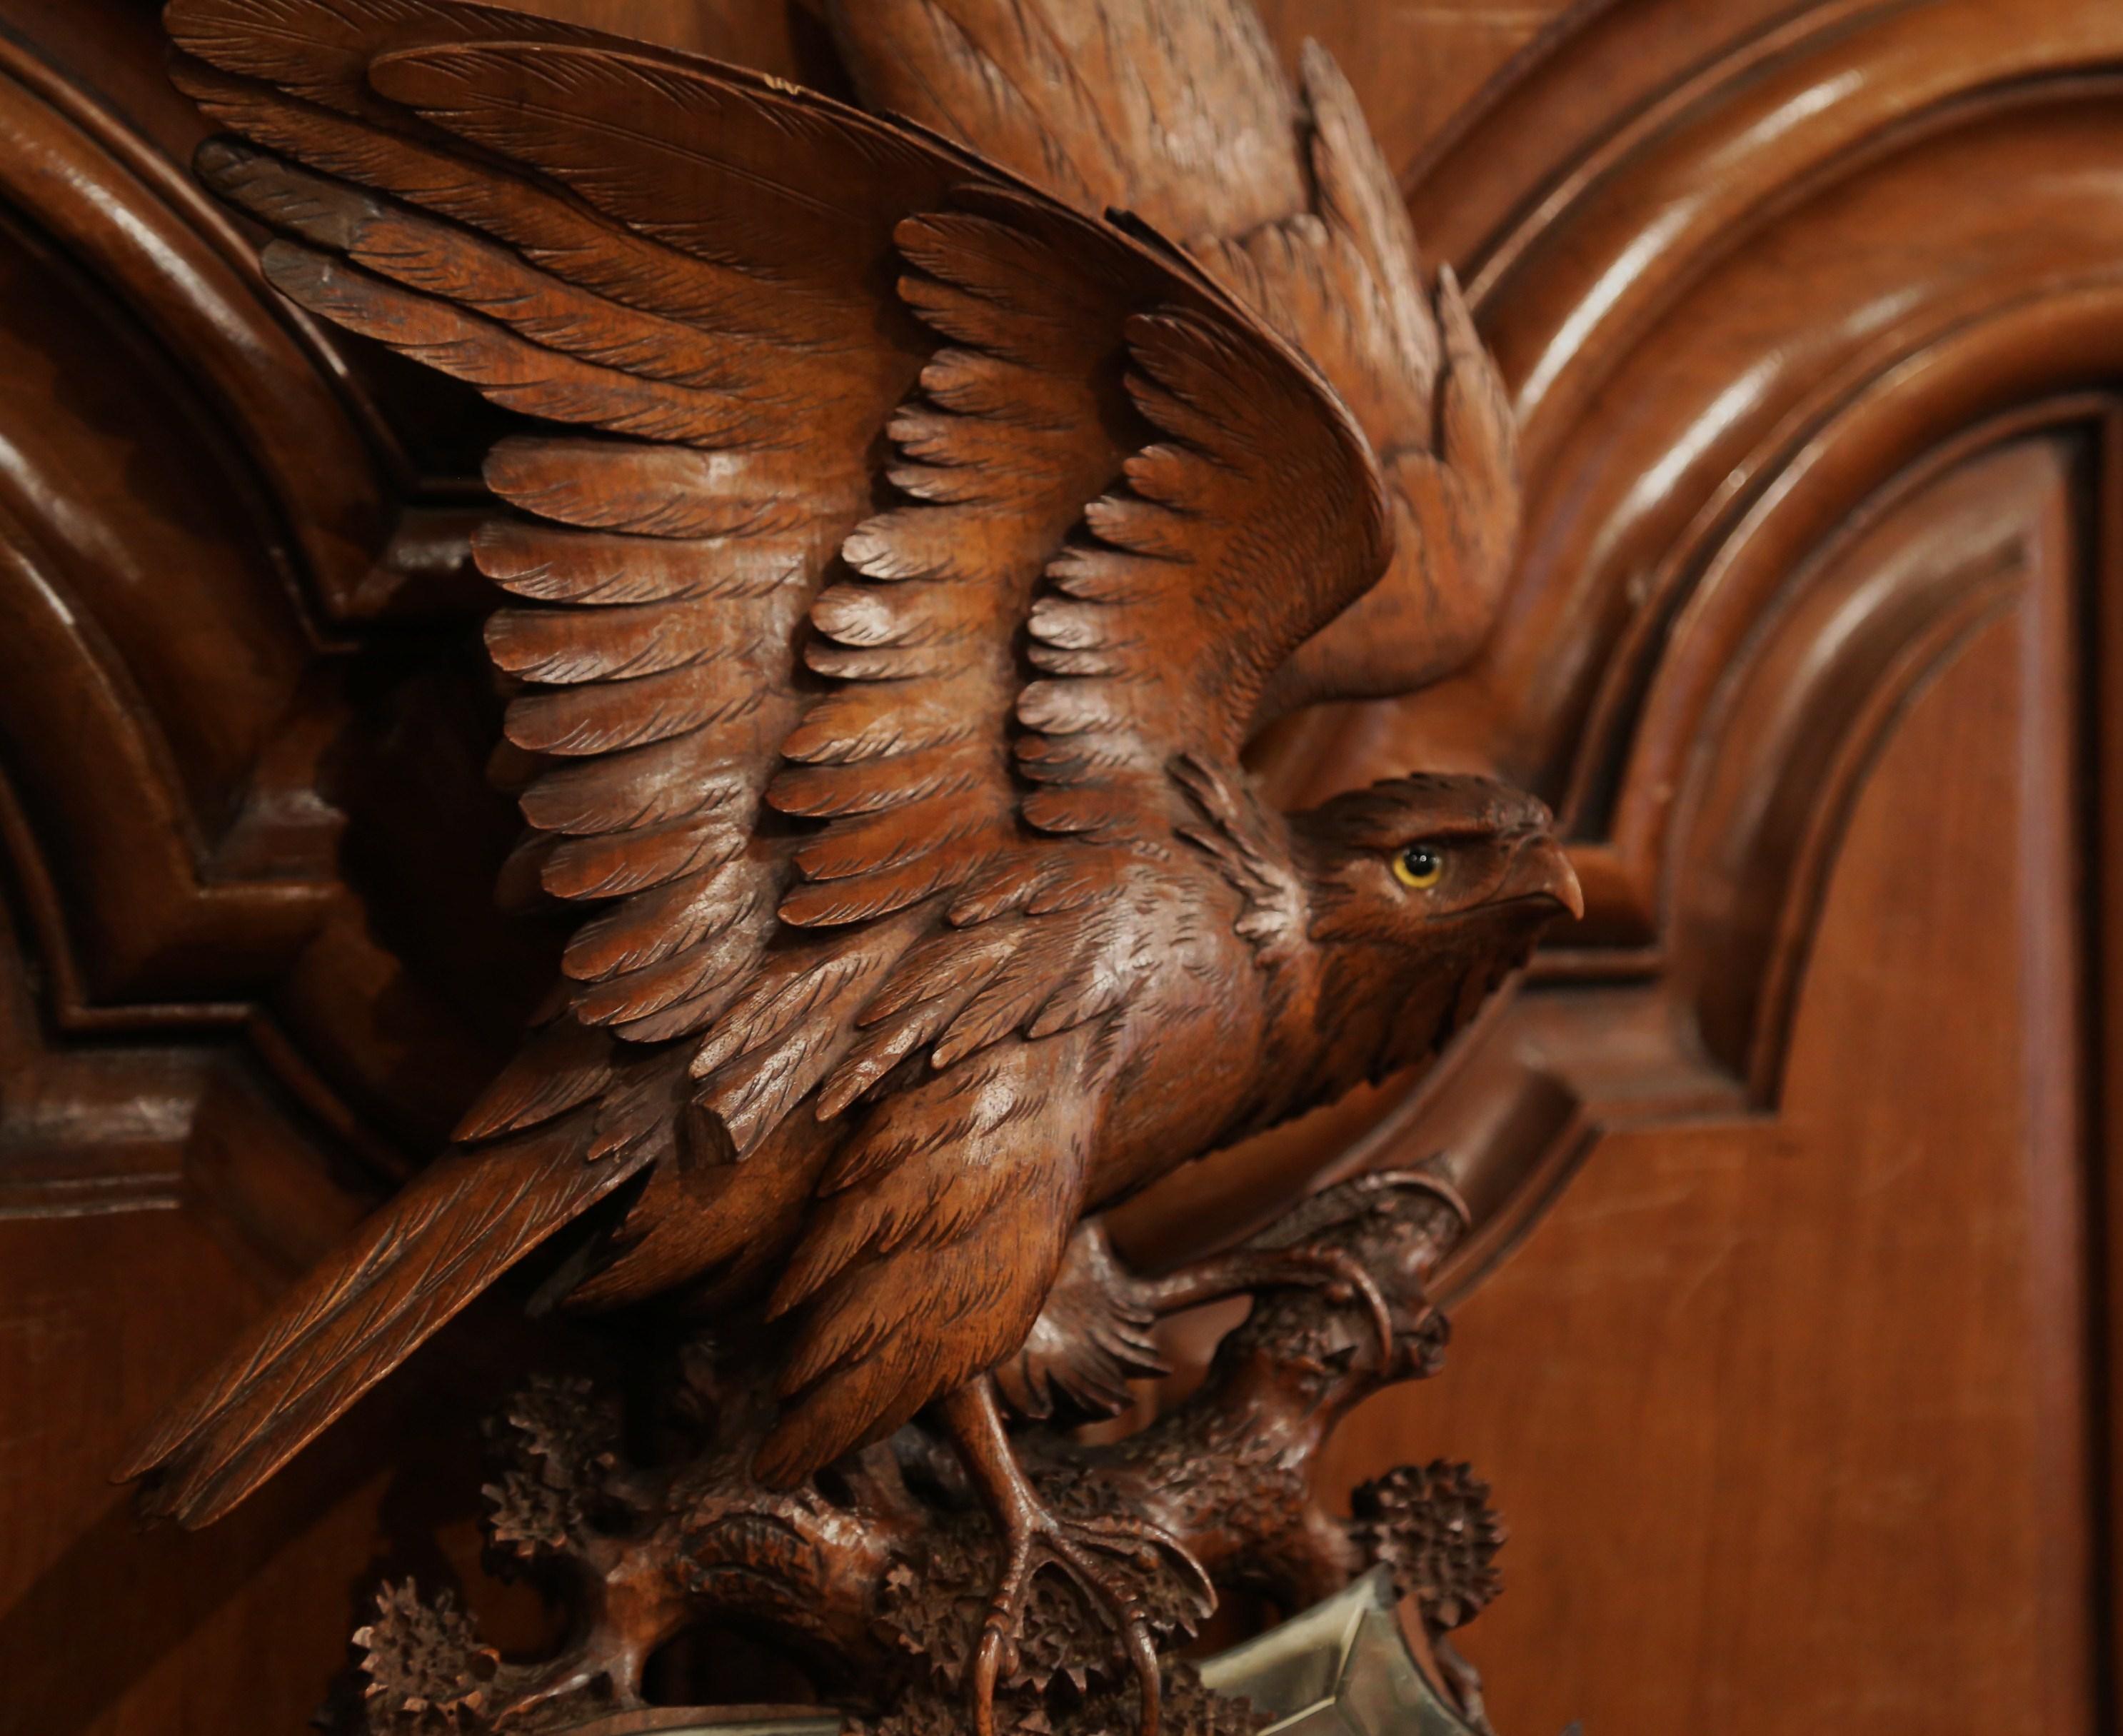 19th Century French Black Forest Carved Walnut Mirror with Eagle Sculpture 2